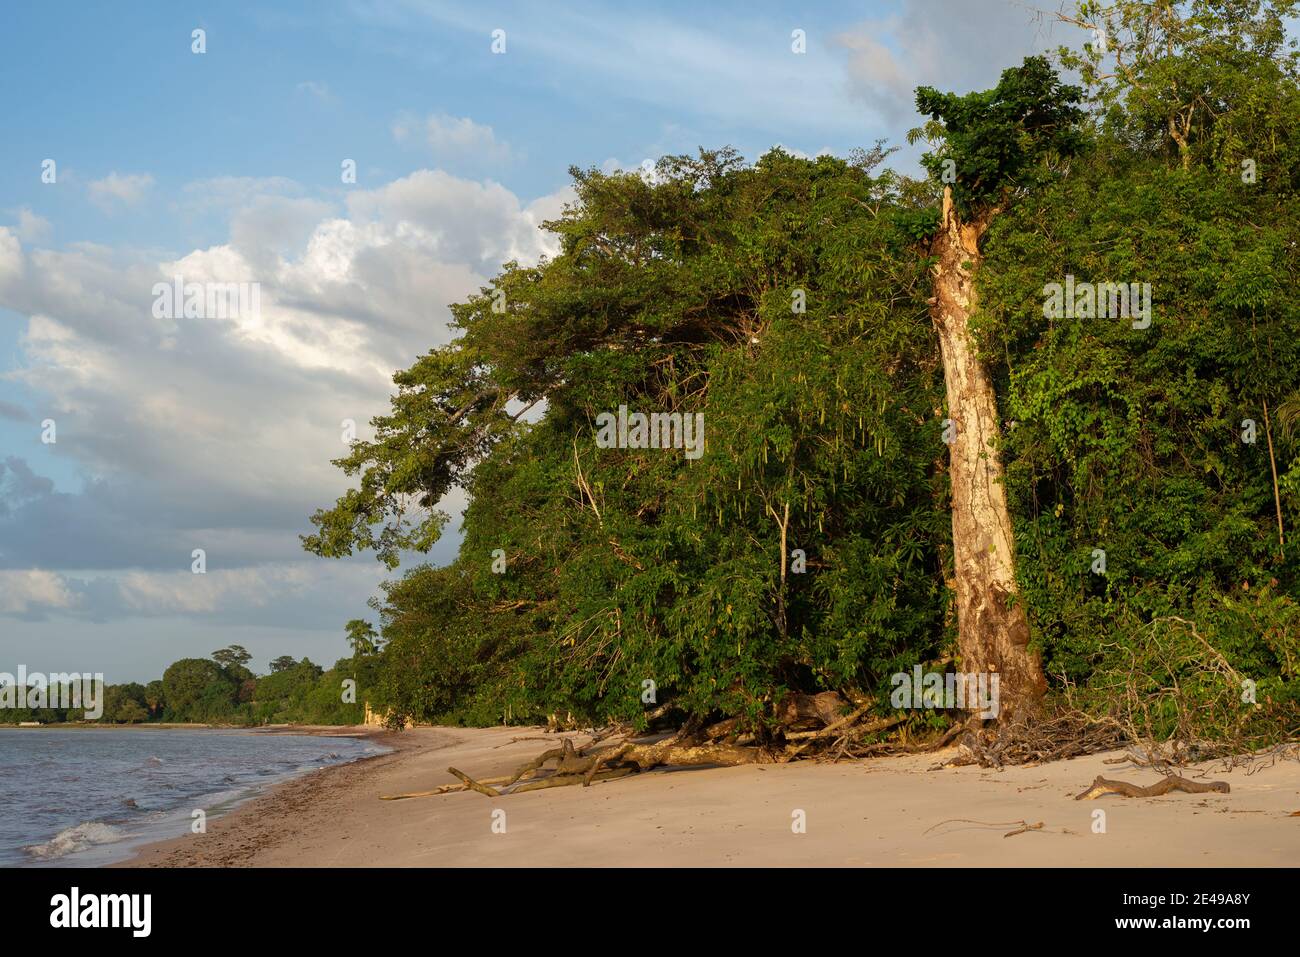 View of a large tree trunk that remains standing after its branches fall on the beach sand. Itupanema Amazon beach, Barcarena, Pará State, Brazil. Stock Photo